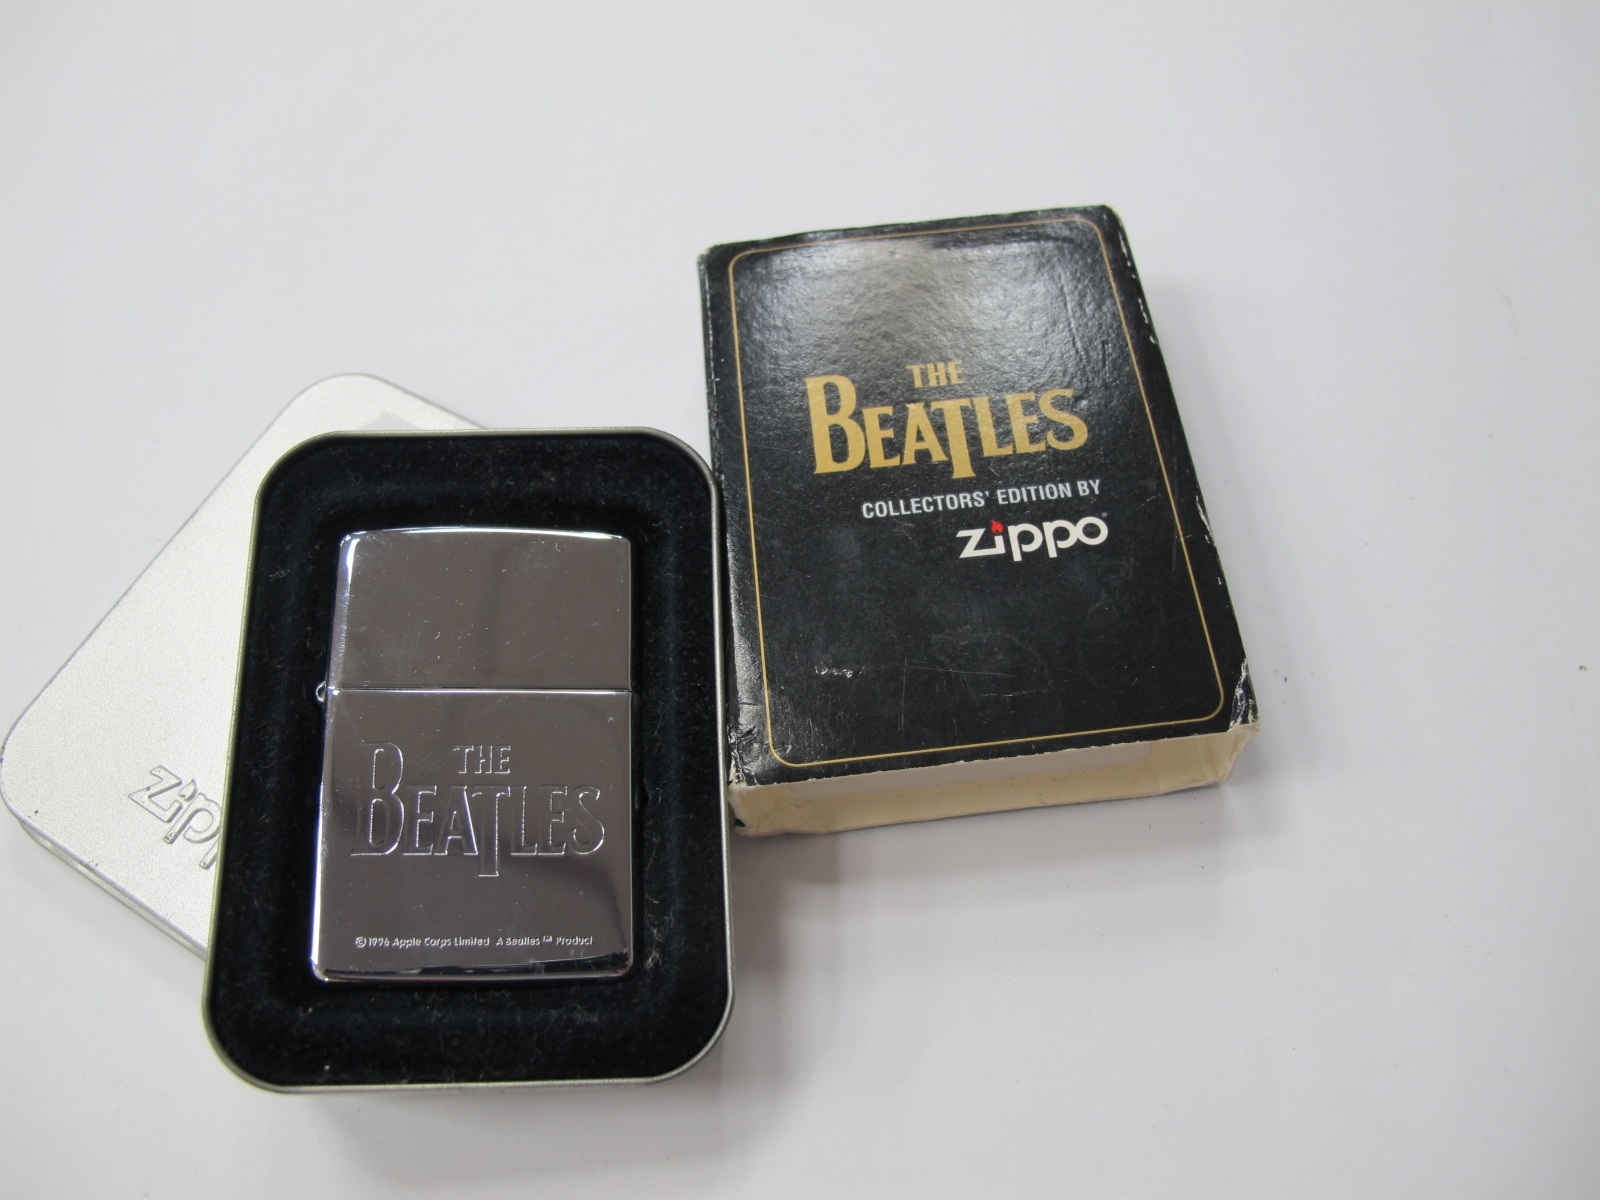 The Beatles Zippo lighter and box, from the the Apple Corp 1996 